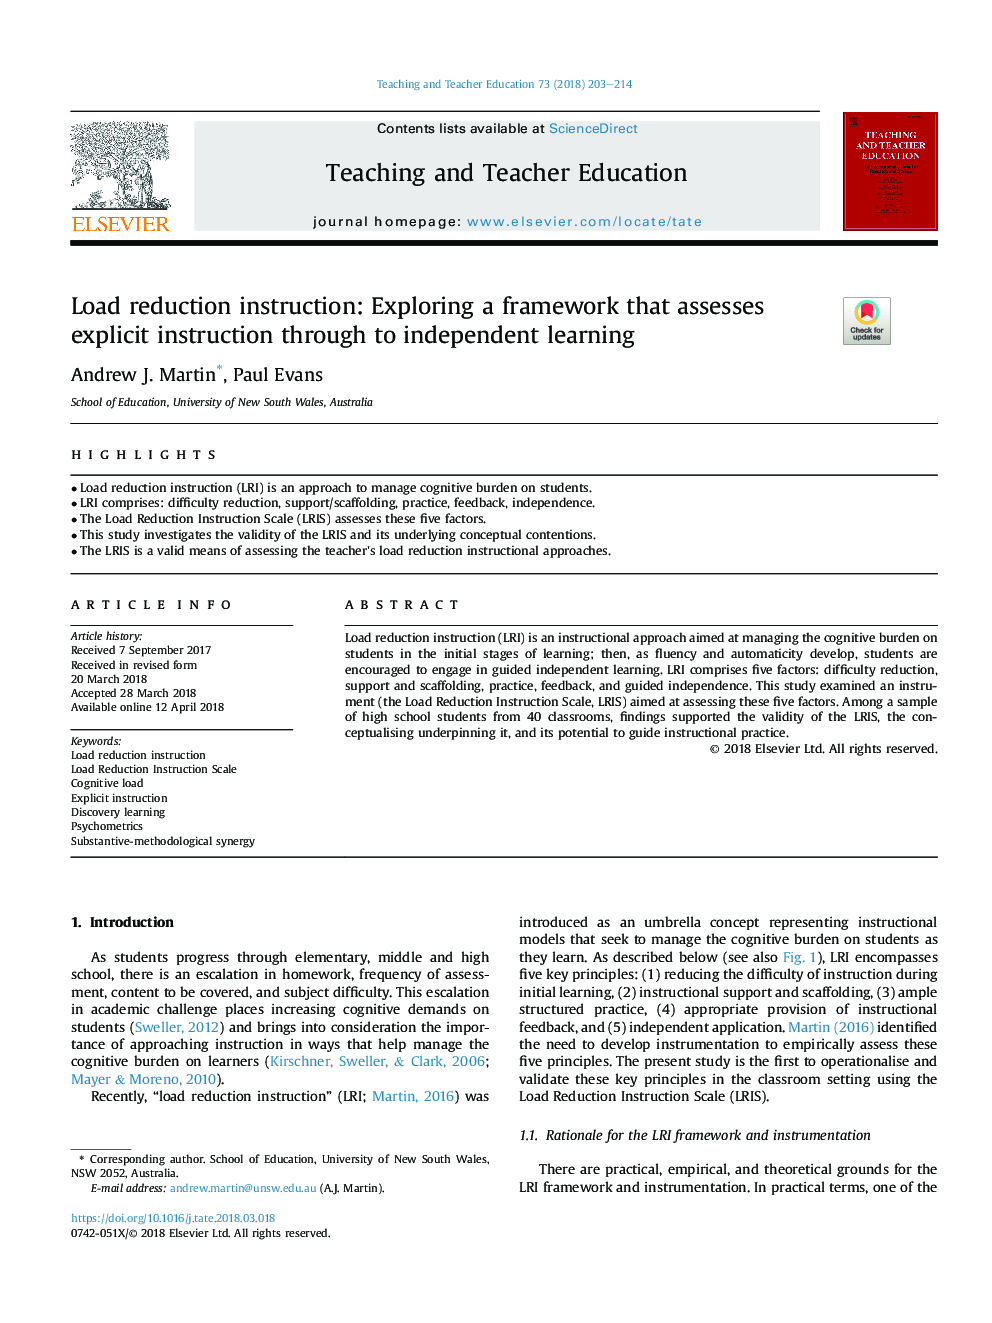 Load reduction instruction: Exploring a framework that assesses explicit instruction through to independent learning